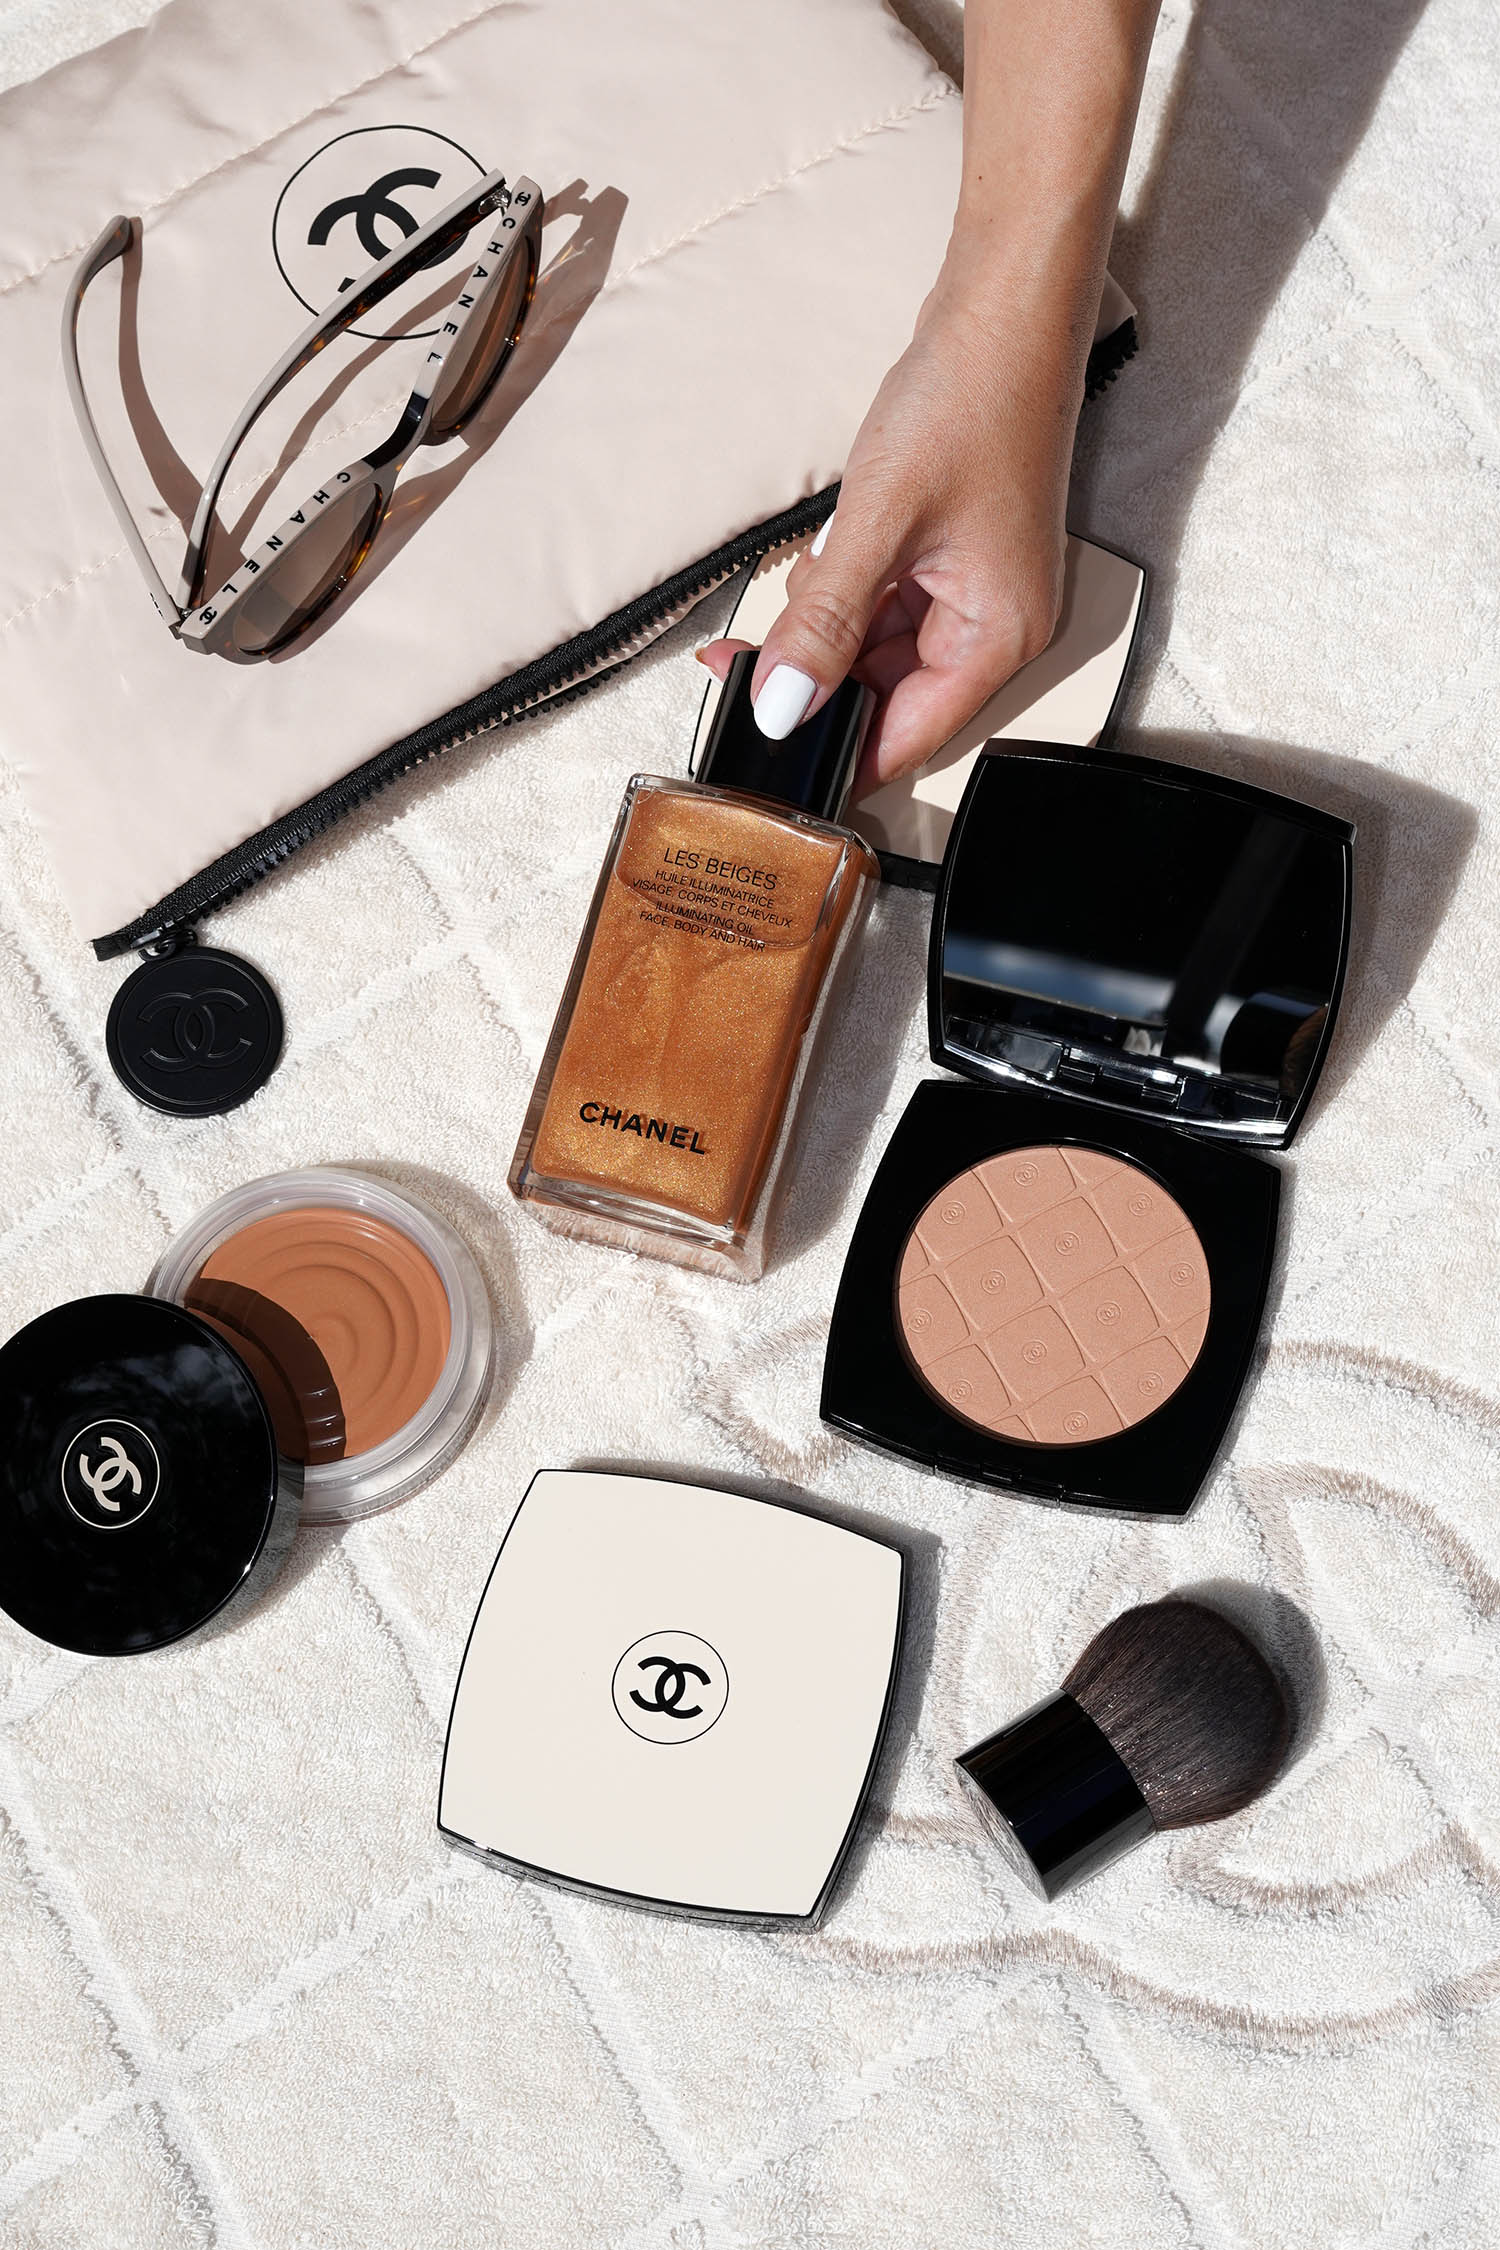 Chanel Les Beiges de Chanel Collection: Review and Swatches  The Happy  Sloths: Beauty, Makeup, and Skincare Blog with Reviews and Swatches